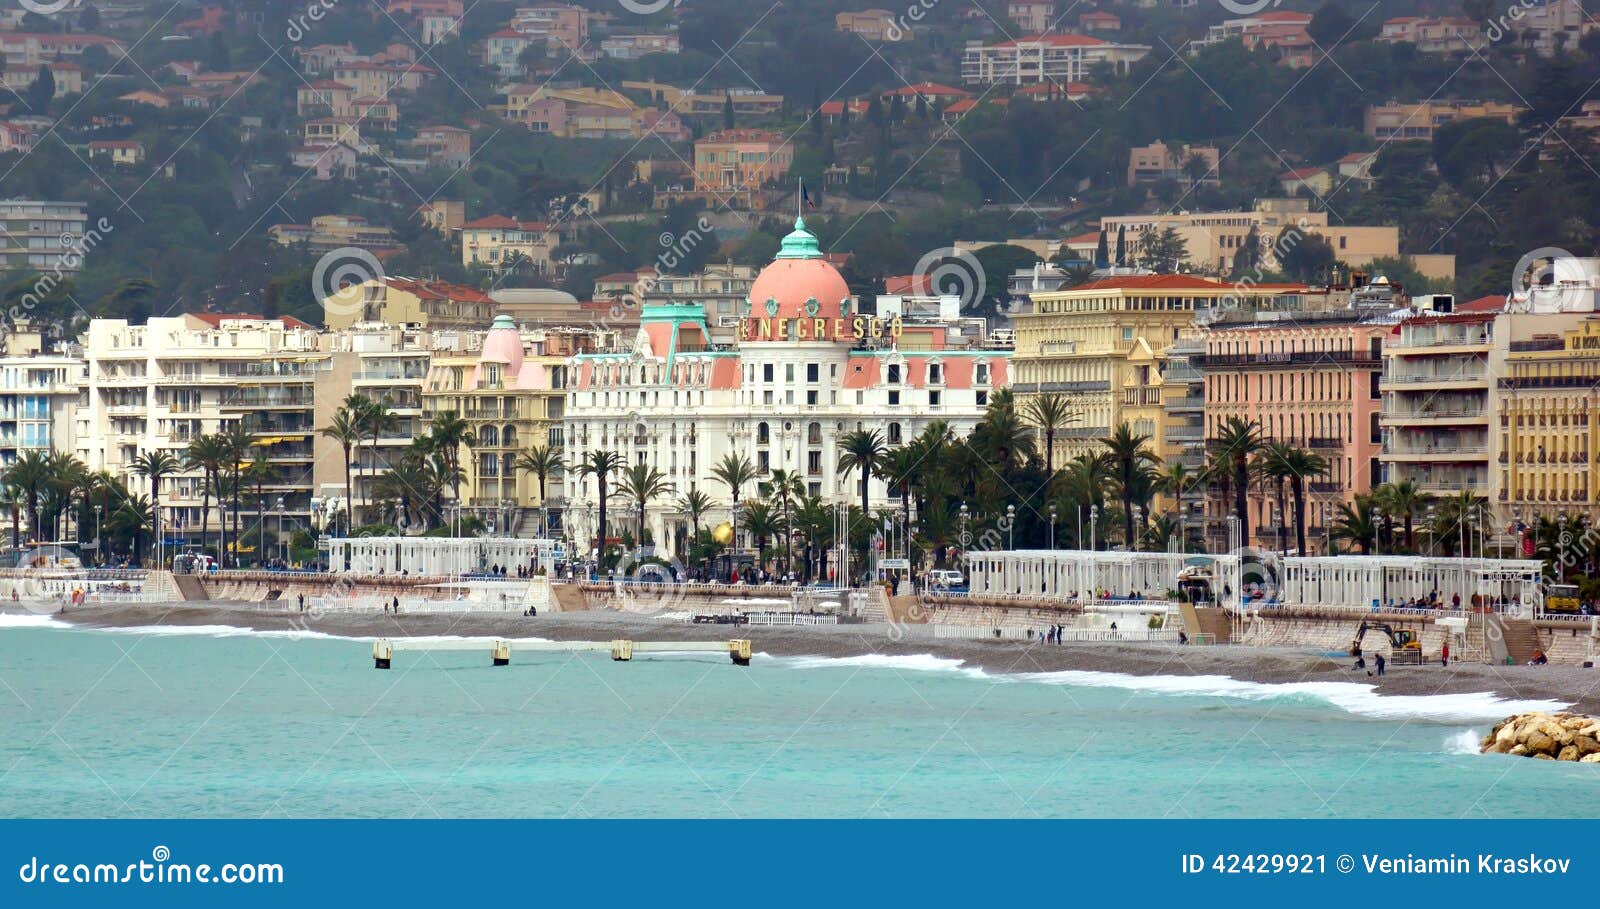 Hotel Negresco In Nice France Editorial Image - Image of 